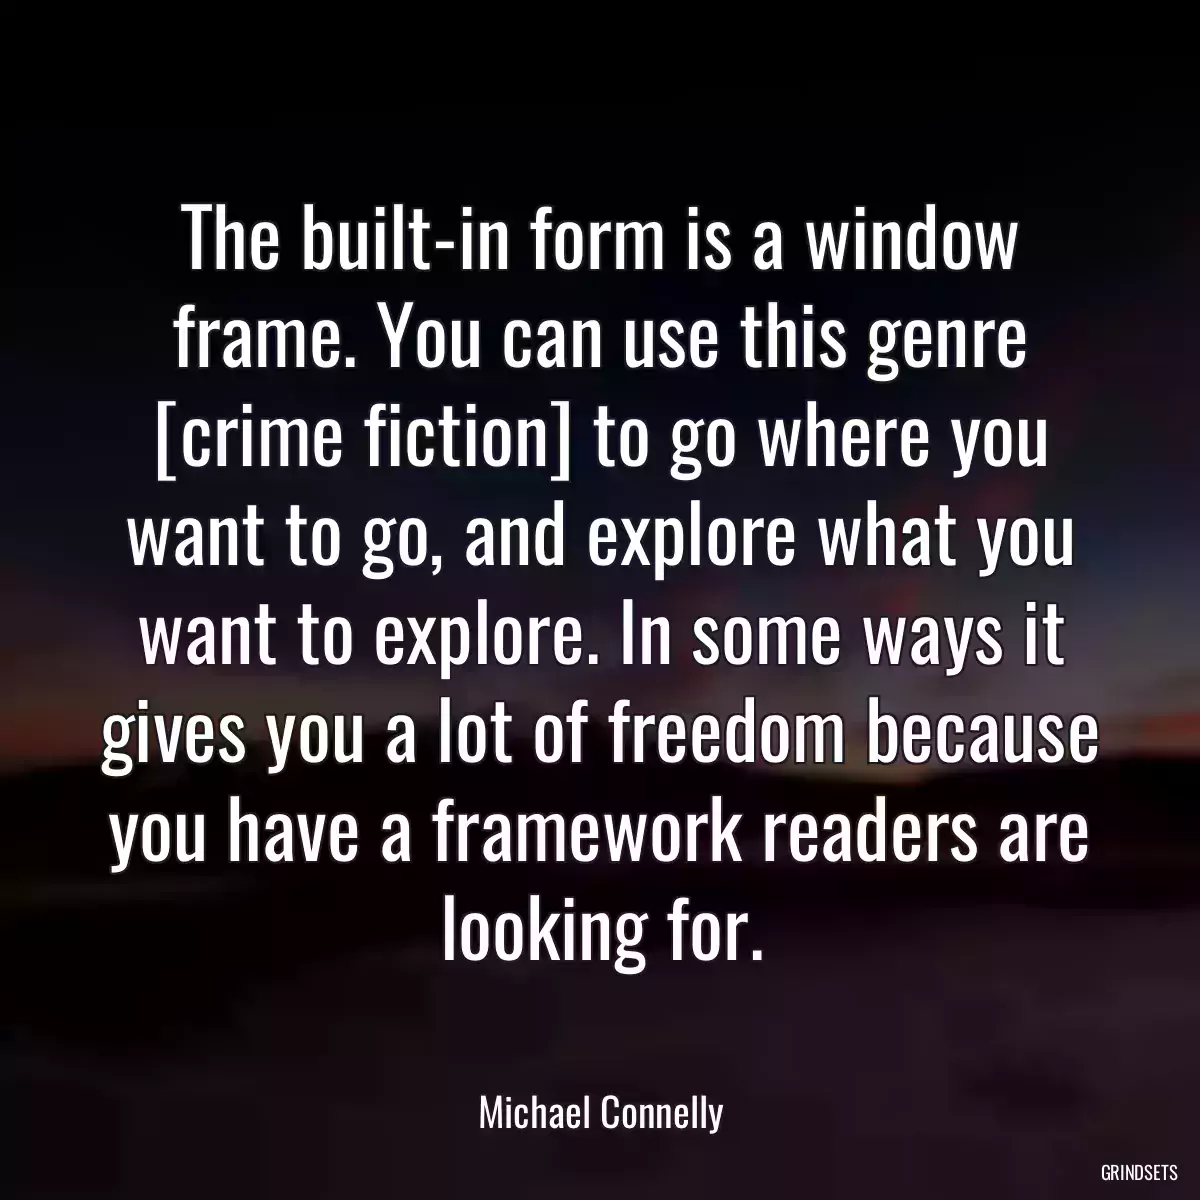 The built-in form is a window frame. You can use this genre [crime fiction] to go where you want to go, and explore what you want to explore. In some ways it gives you a lot of freedom because you have a framework readers are looking for.